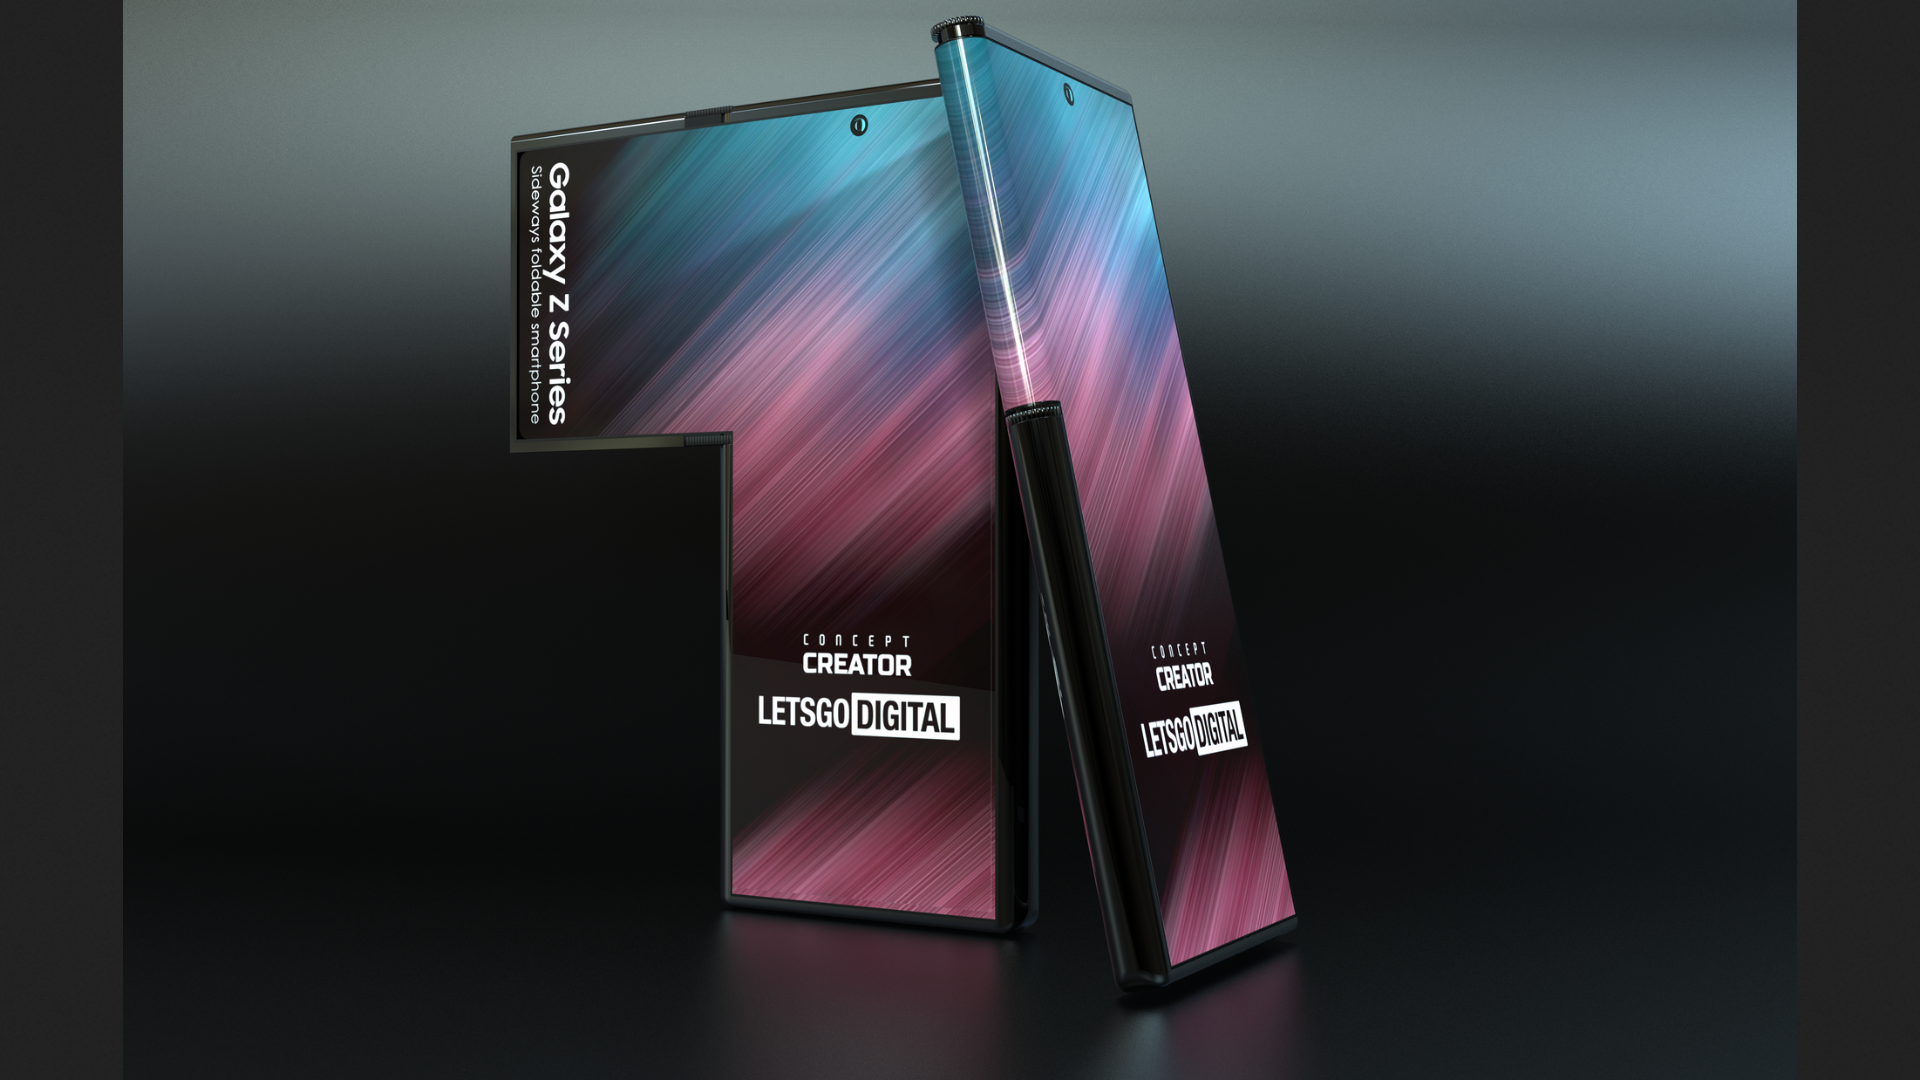 Samsung's patented L-shaped foldable display appears in stunning new smartphone concept renders thumbnail